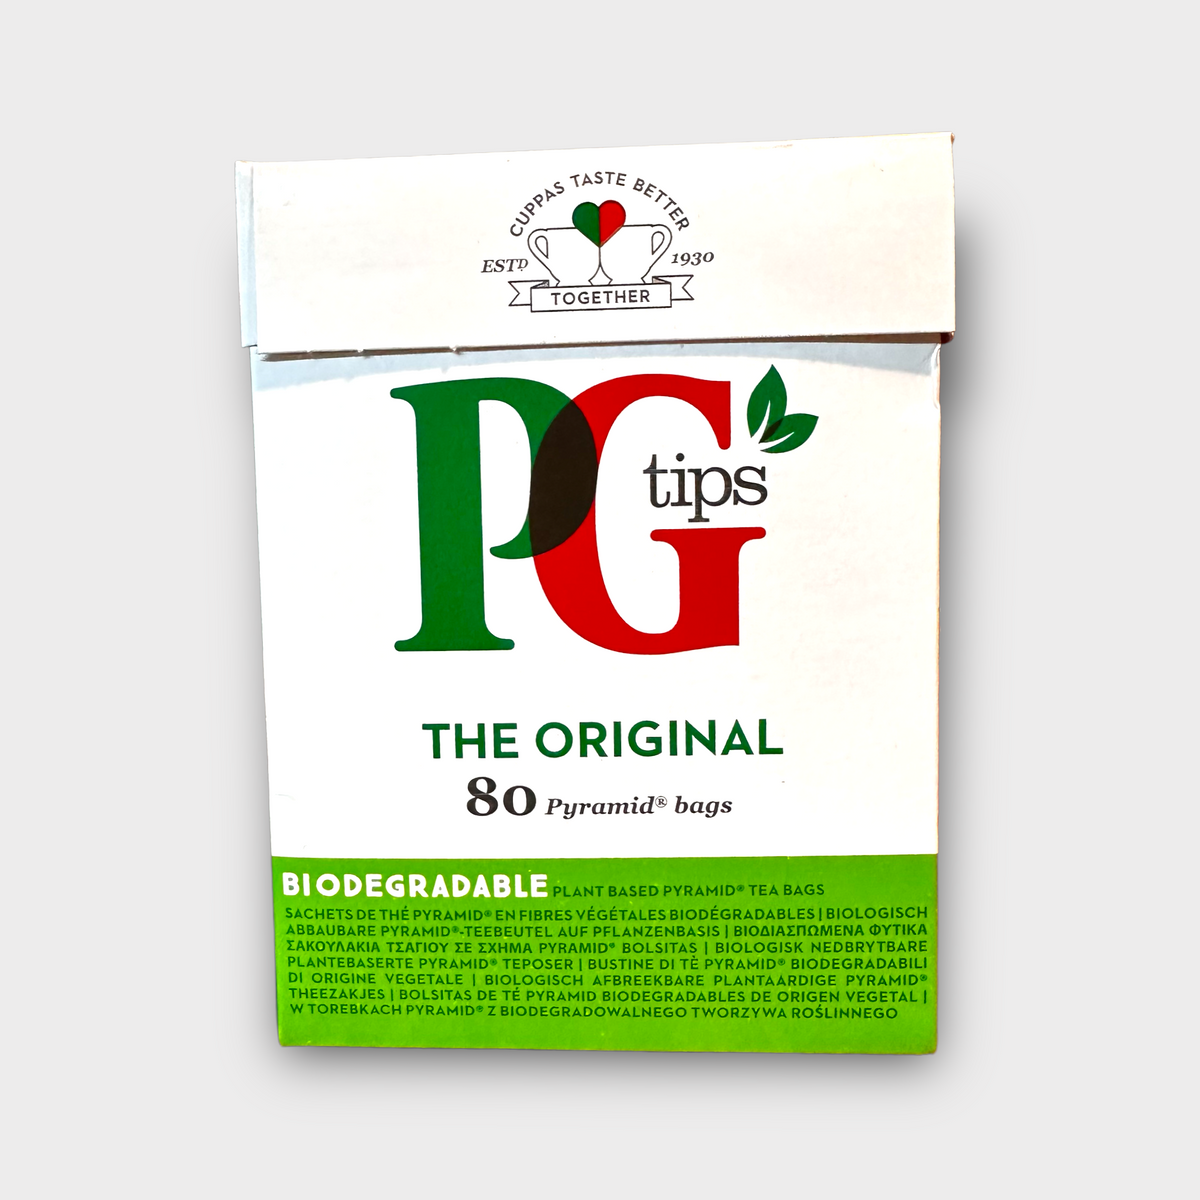 PG tips with a load of milk :) : r/tea